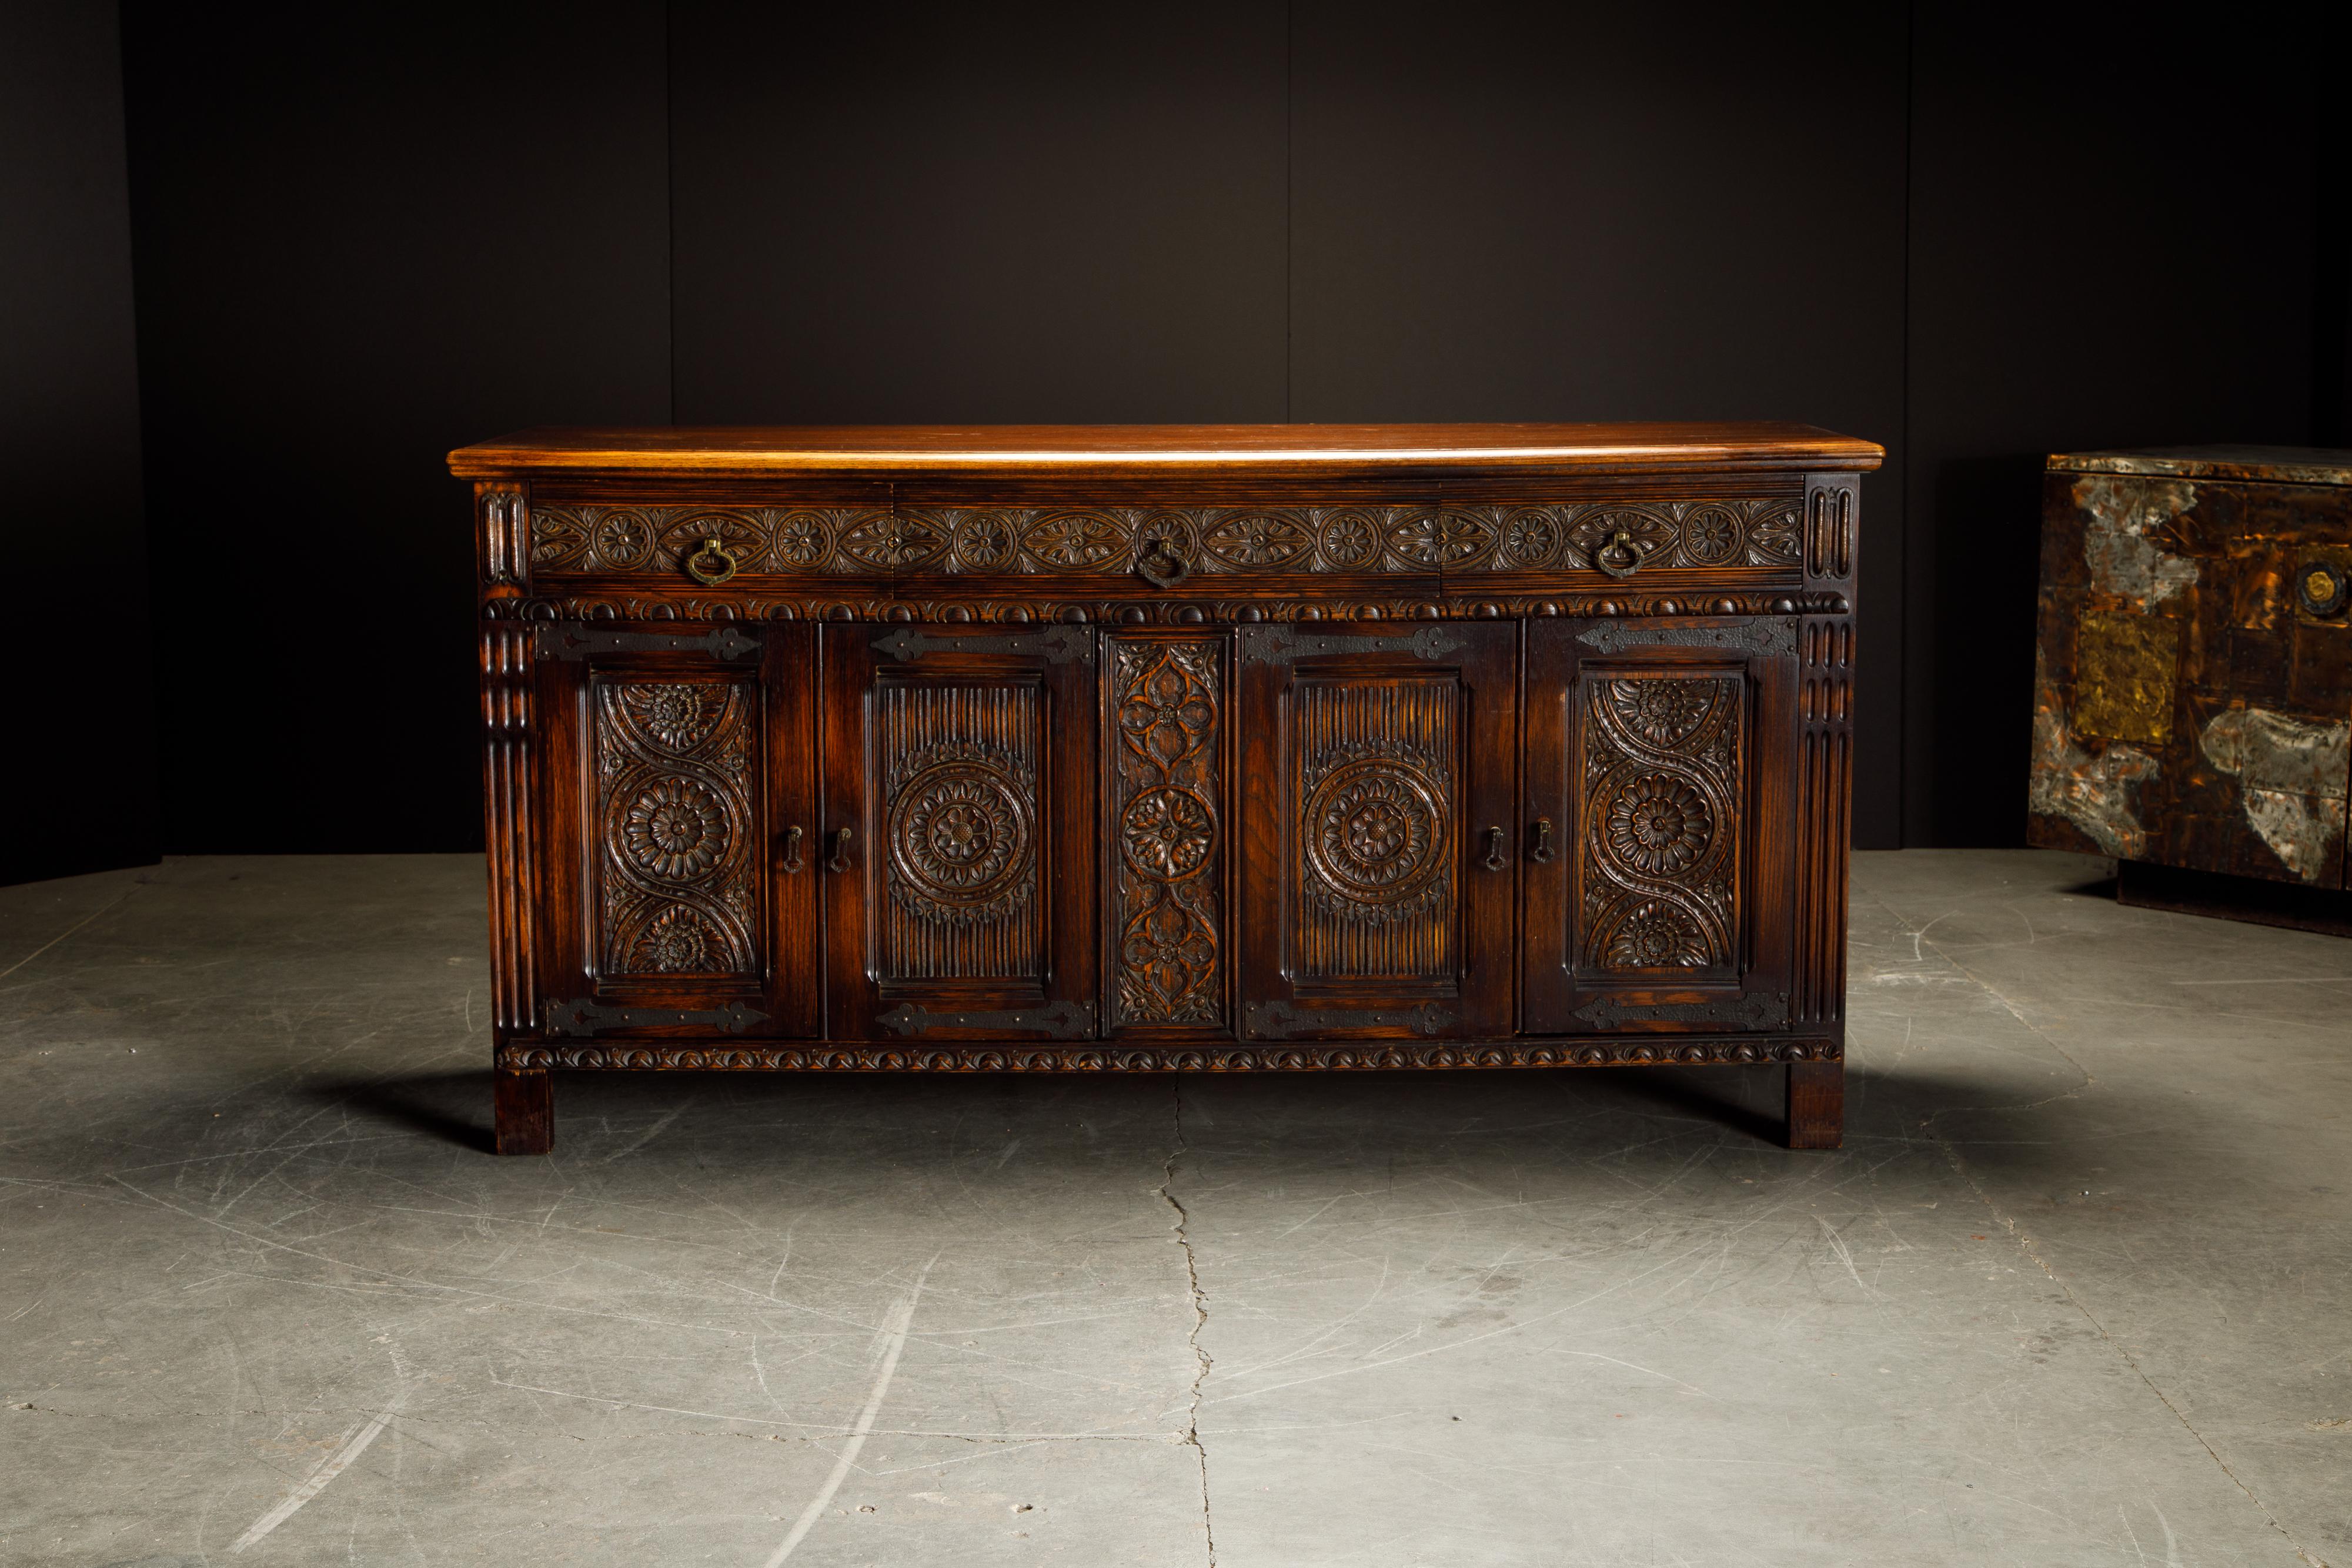 This gorgeous carved oak sideboard credenza is in the Jacobean Revival style with intricate detailing and ample storage space. We also have in other listings the matching pieces from this set which include a lowboy server / dry bar, highboy cupboard